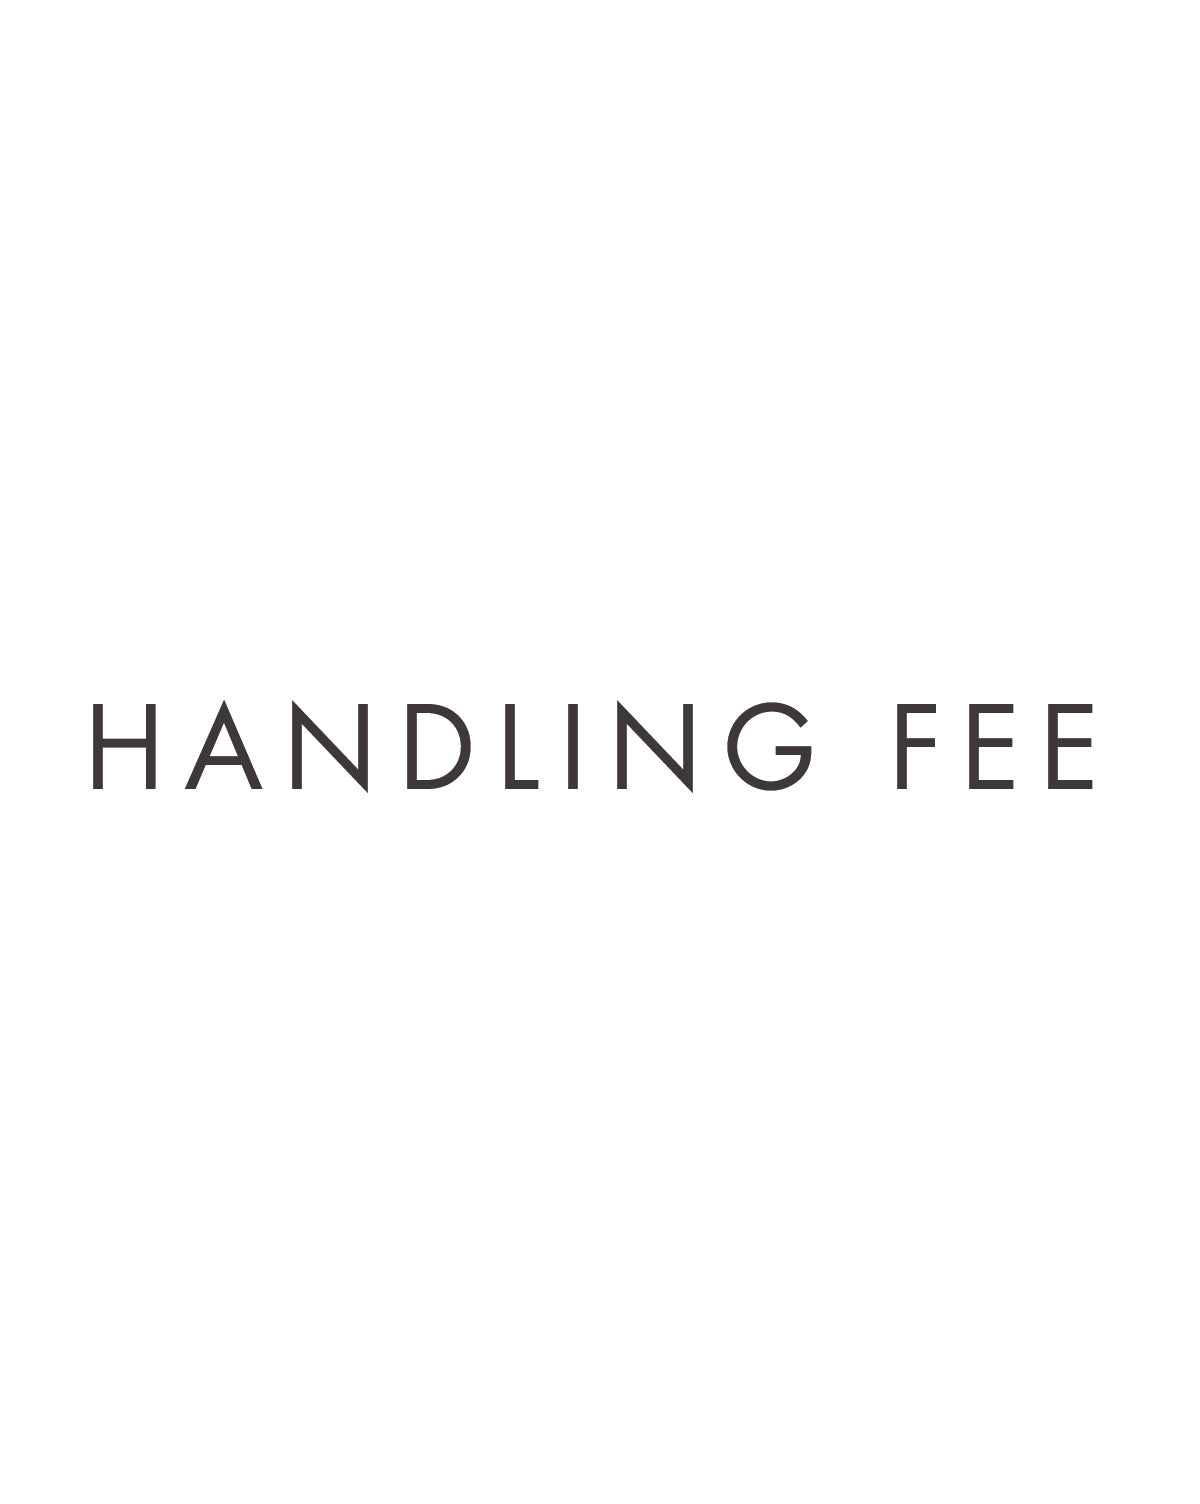 McGee & Co., Handling Fee for "Youngman Console Table"